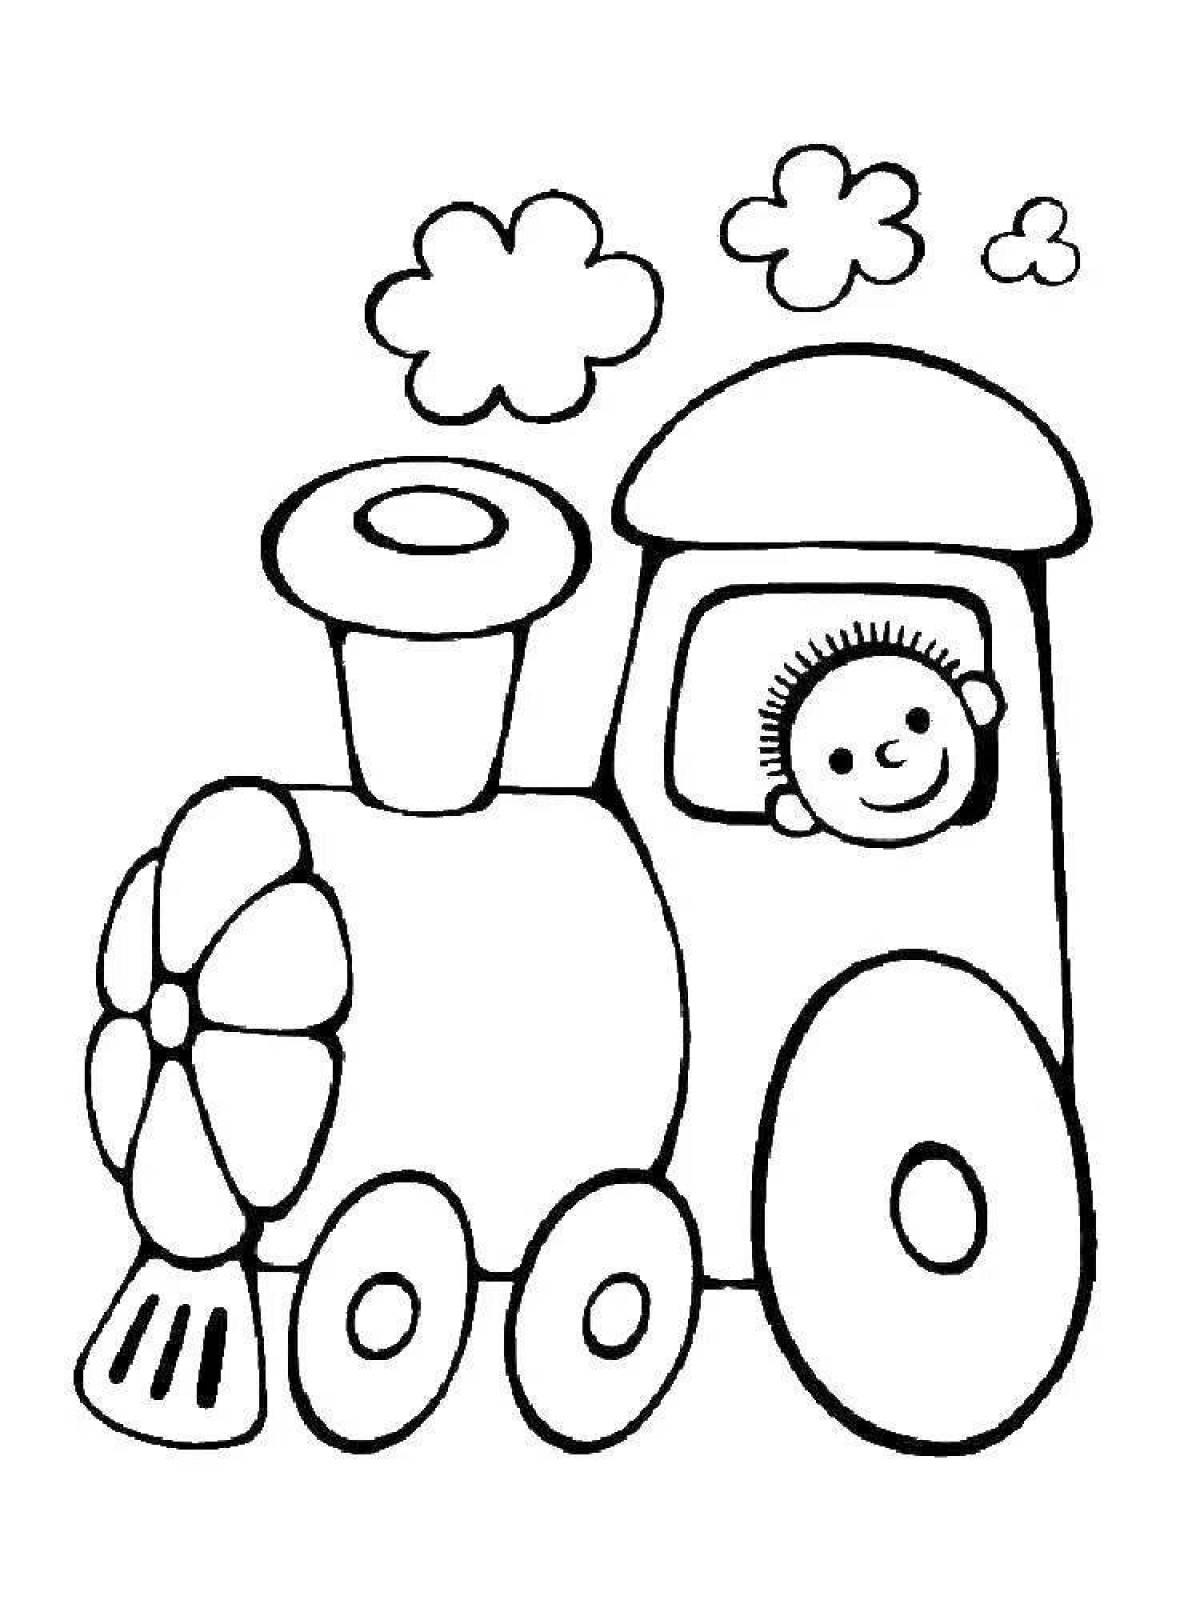 Coloring book colorful-dream for 2 year olds